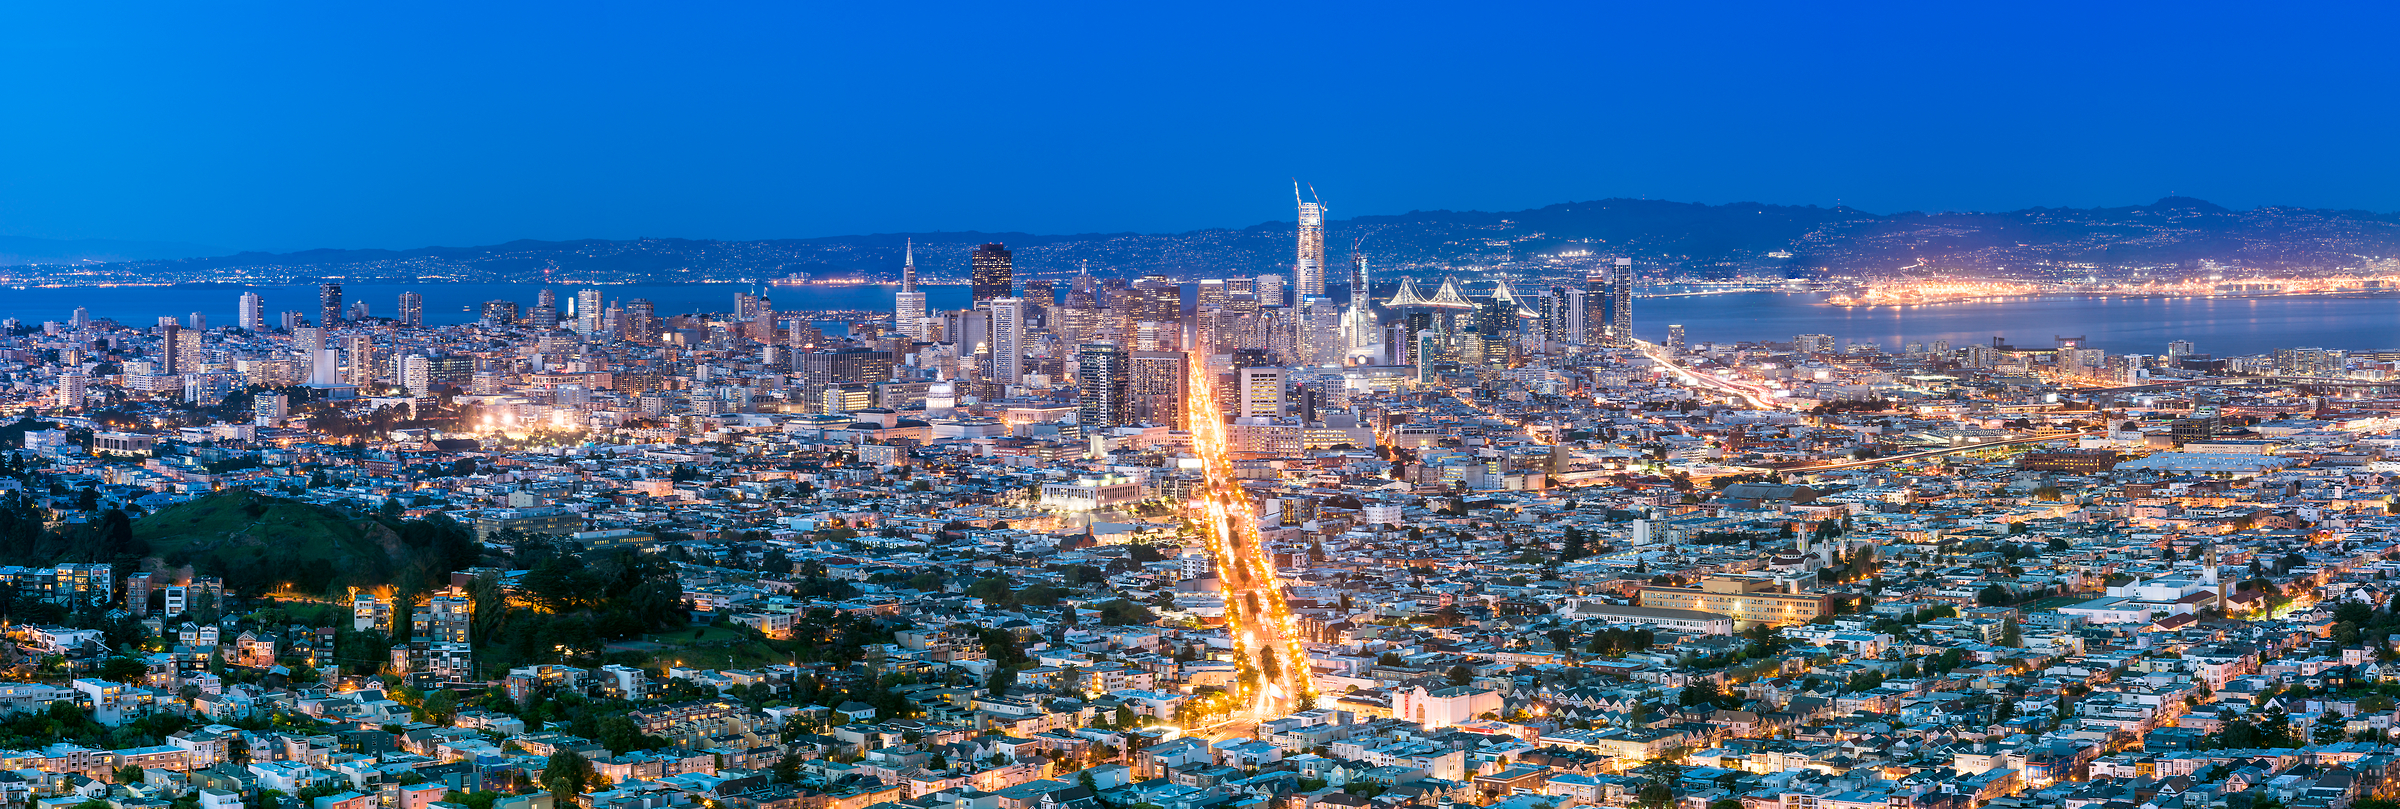 363 megapixels! A very high resolution, large-format VAST photo of the Downtown San Francisco city skyline at sunset dusk; fine art cityscape photograph created by Justin Katz in California